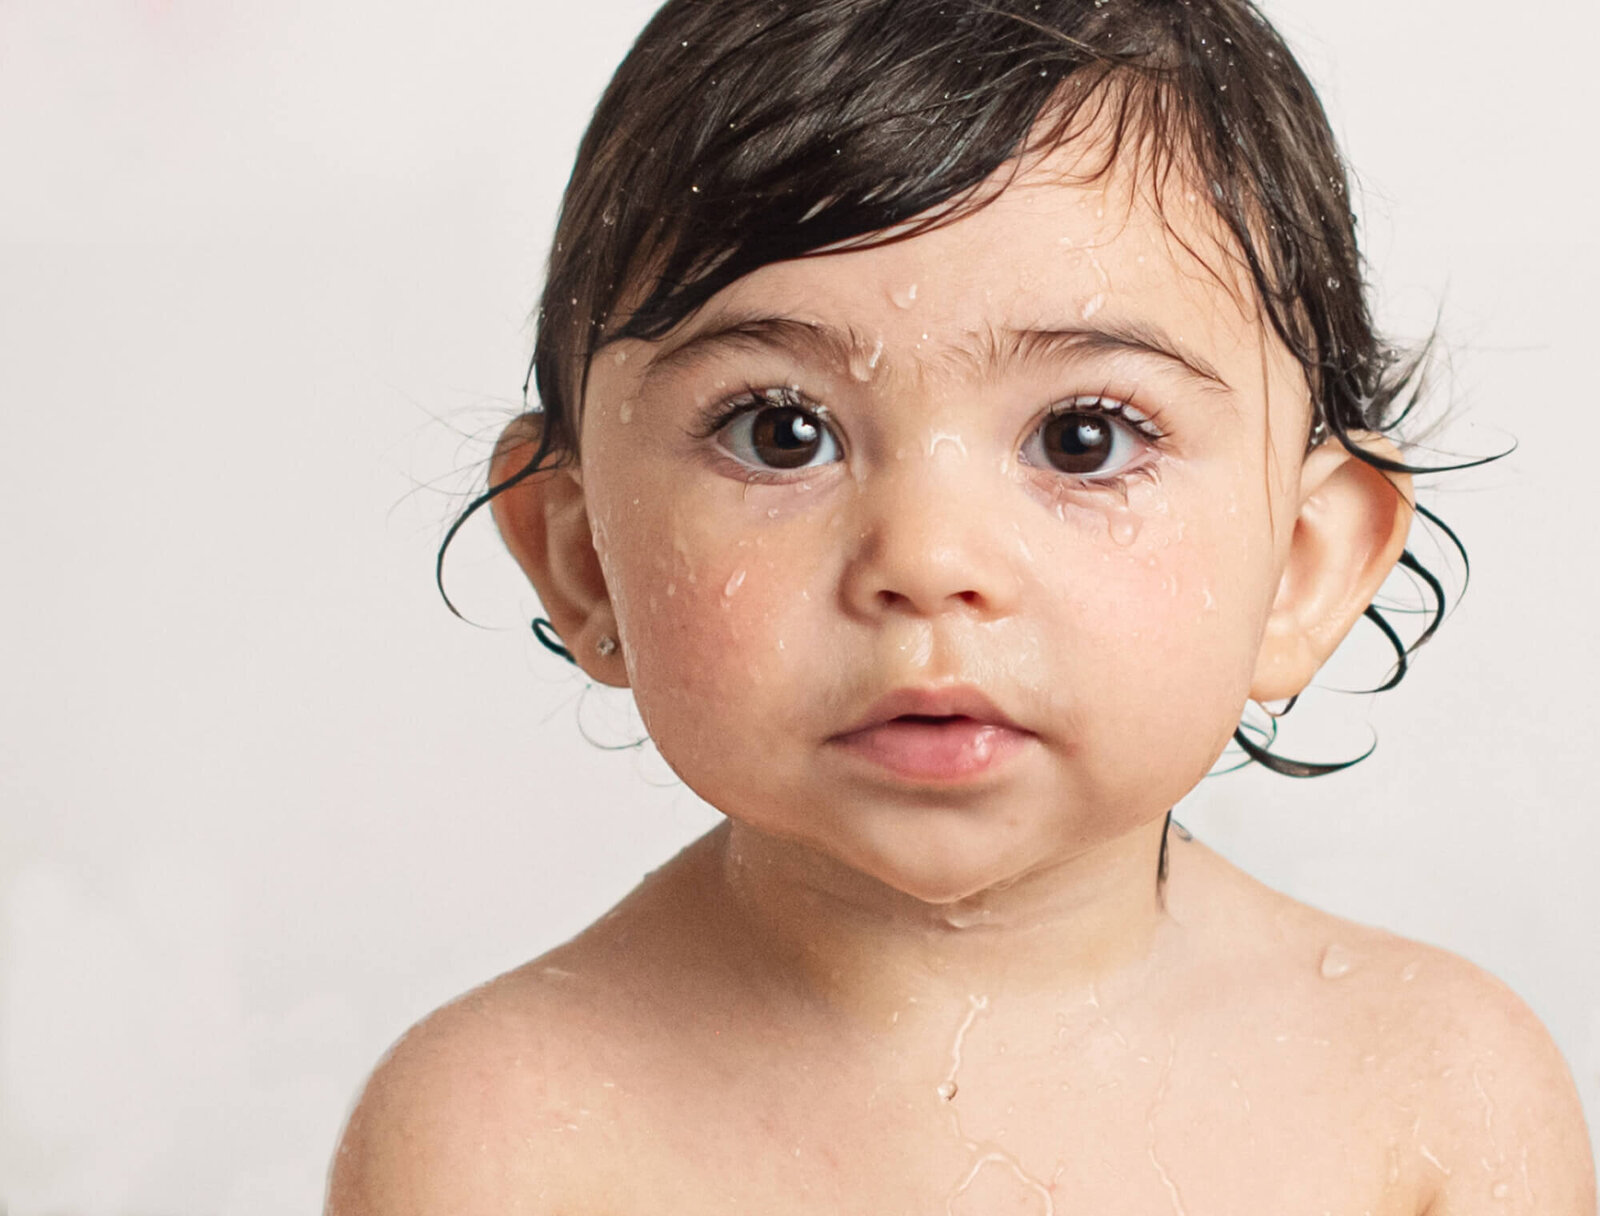 One year old girl with water droplets on face close up